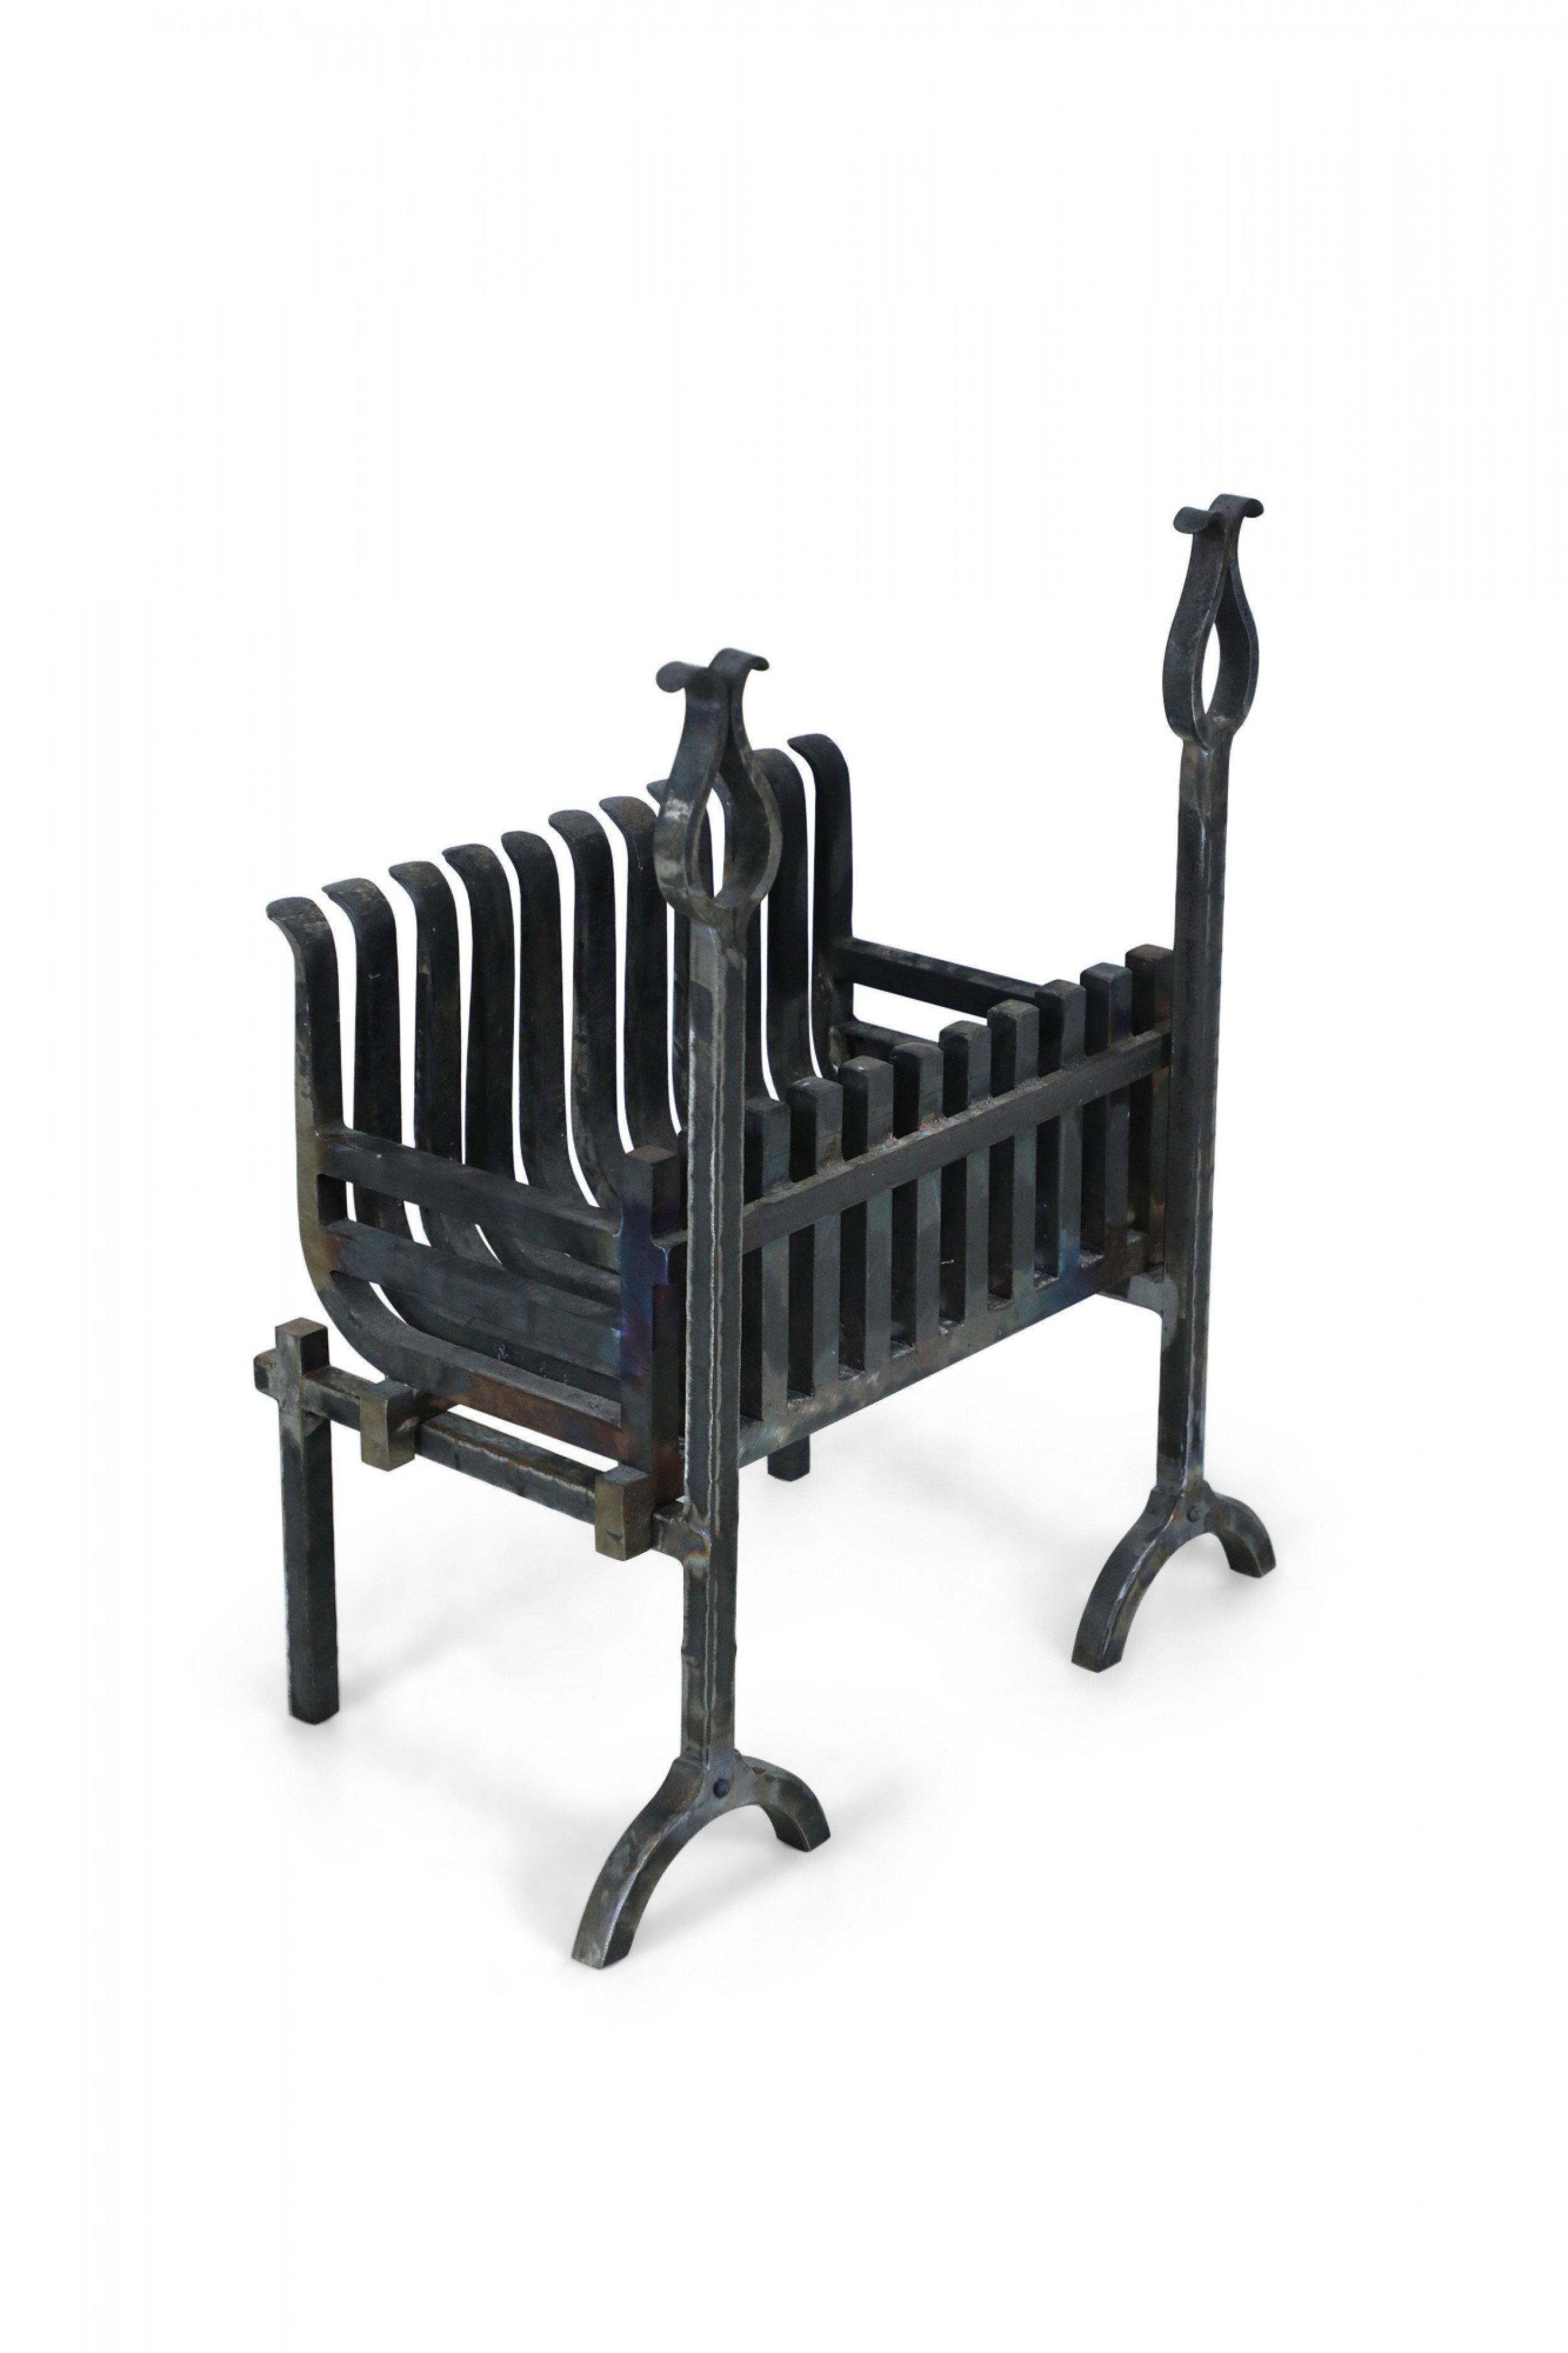 20th Century American Art Deco Iron Fire Grate with Andirons For Sale